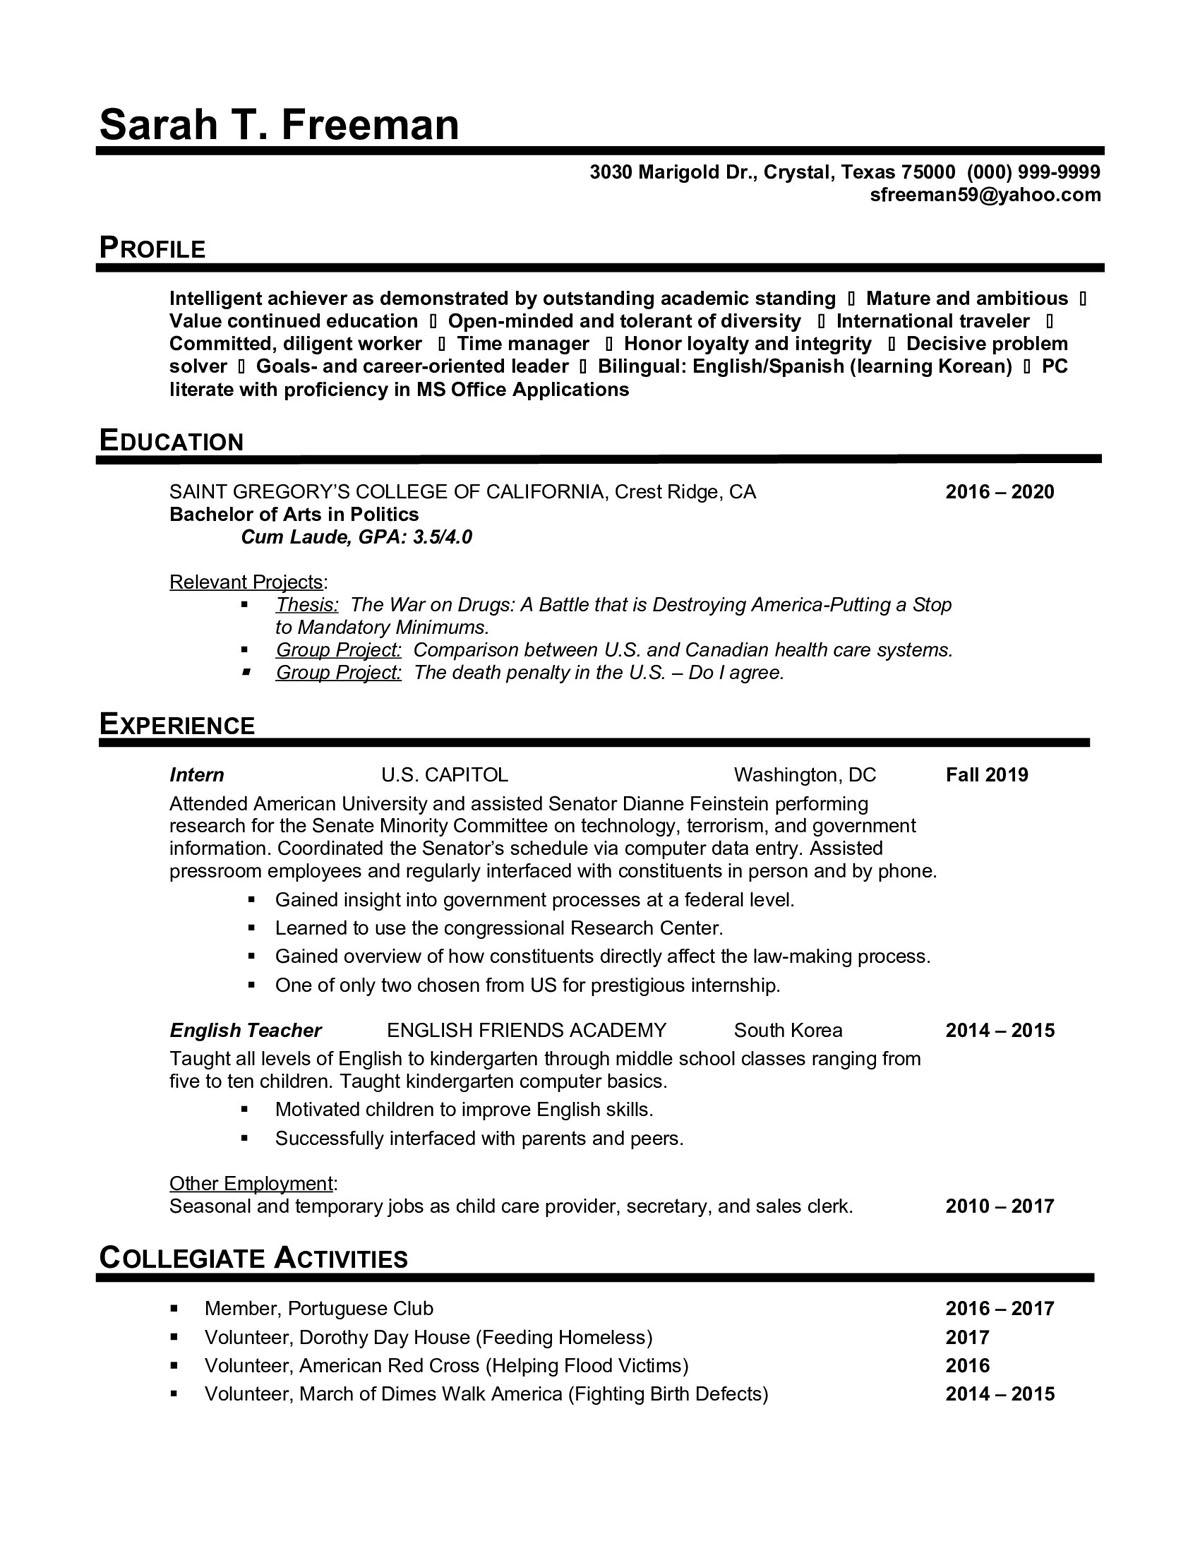 Sample resume: Government, Entry Level, Chronological